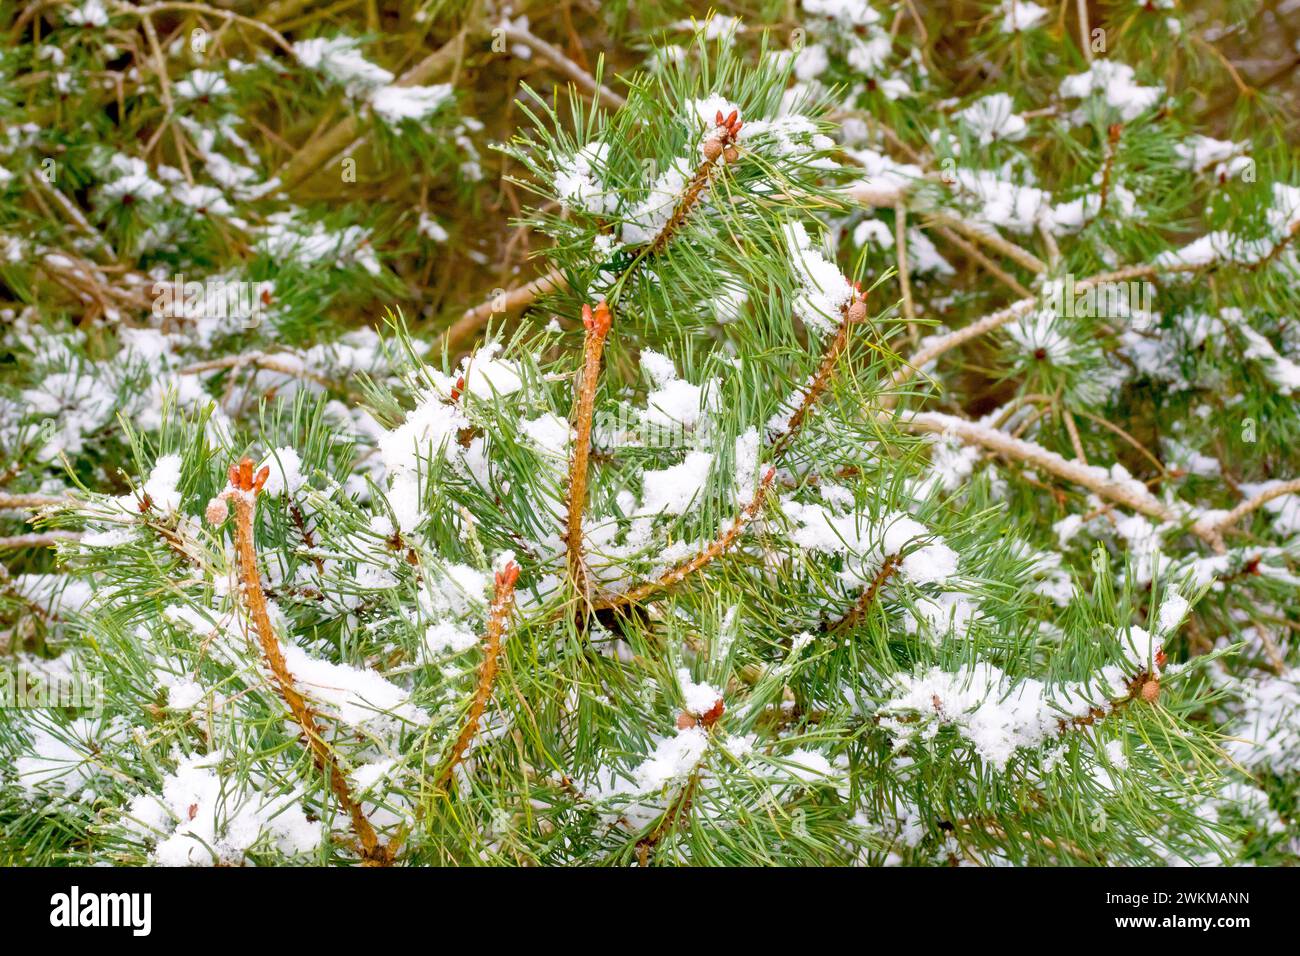 Scot's Pine (pinus sylvestris), close up showing branches of the tree with the green needles or foliage covered in snow. Stock Photo